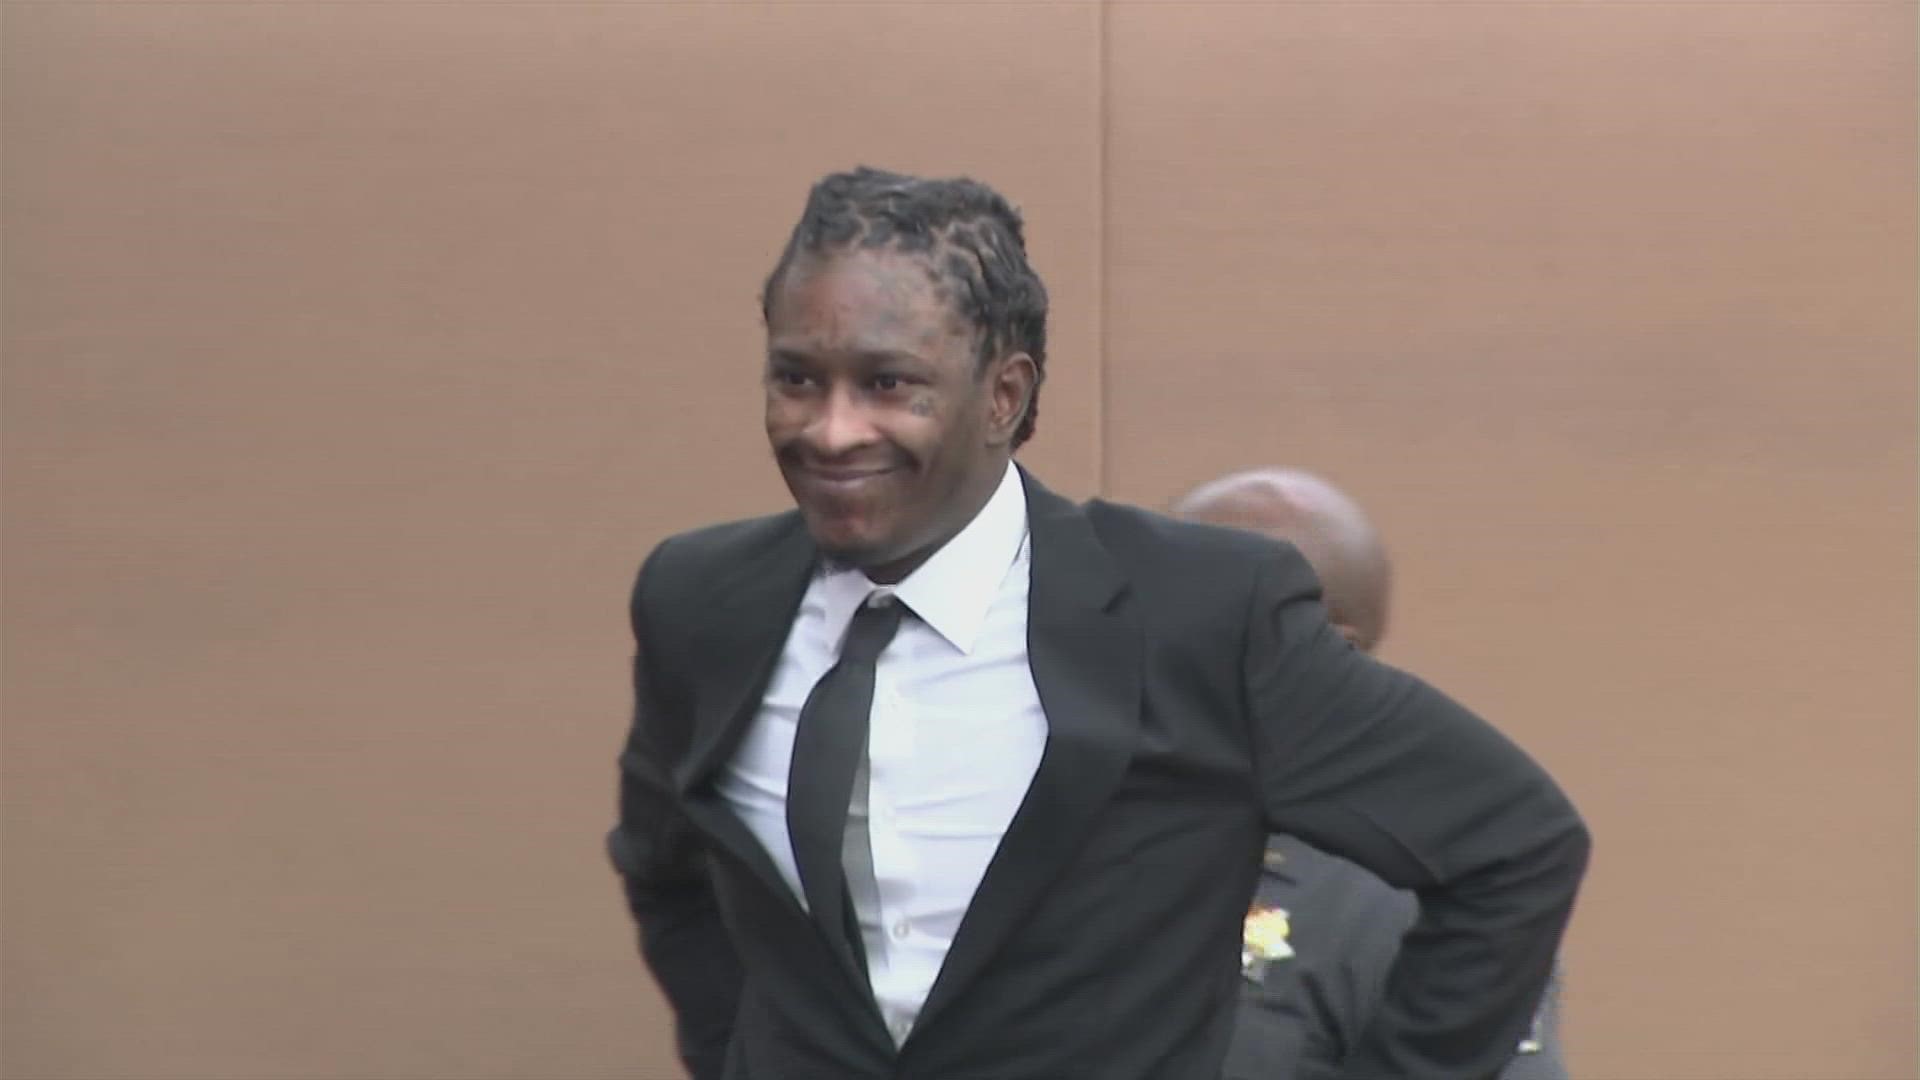 Young Thug is back in court on Thursday ahead of the expected start of his trial in January. NOTE: No audio with this video.